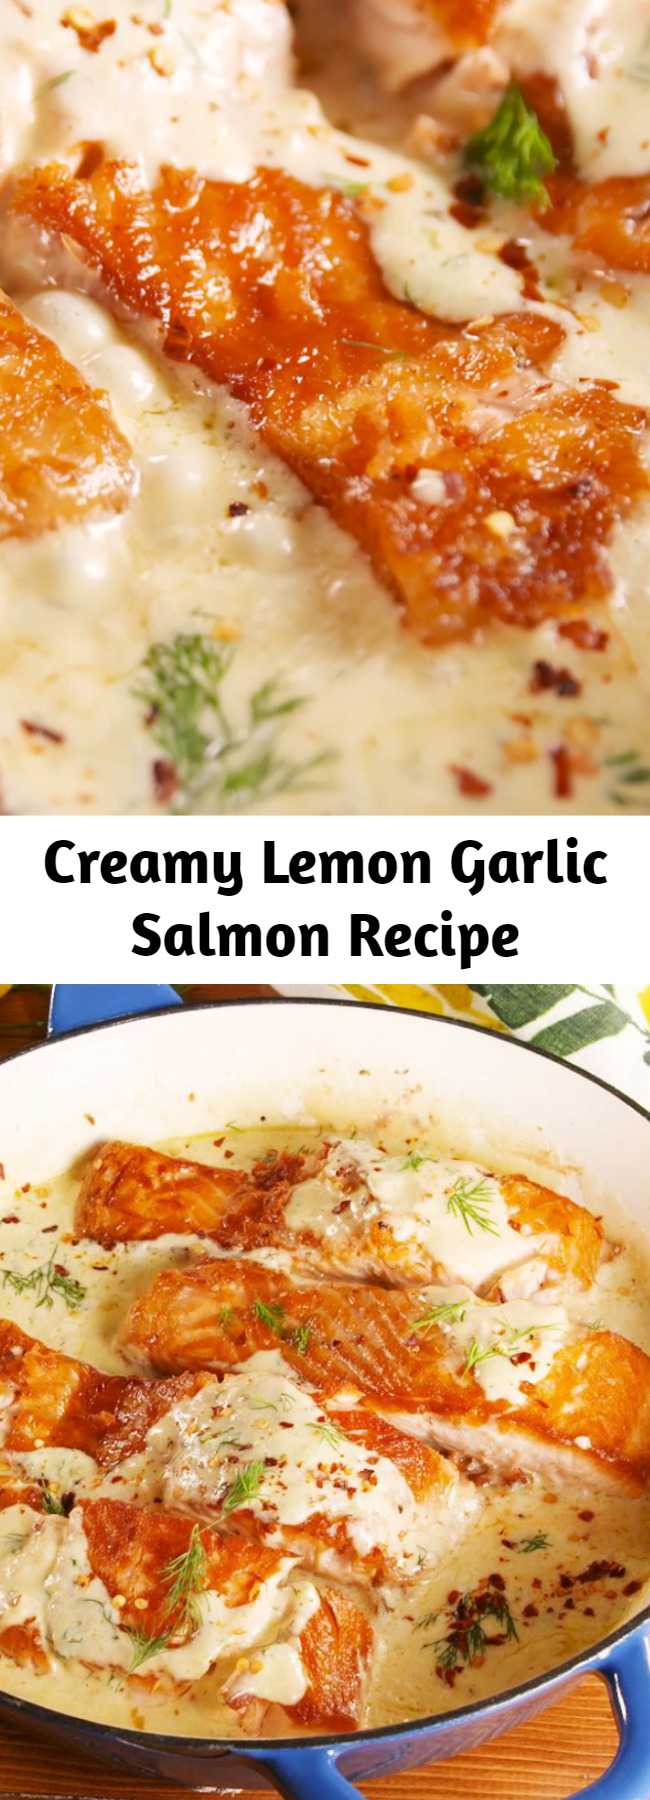 Creamy Lemon Garlic Salmon Recipe - Dill's bright flavor is perfect for this creamy sauce. But if you're not a big fan, we recommend using something like thyme instead! Chives or parsley could also work, but their presence wouldn't be as bold. be as assertive. #dinnerrecipes #dinnerideas #seafood #salmonrecipes #salmon #datenight #datenightdinner #dinner #glutenfreerecipes #glutenfree